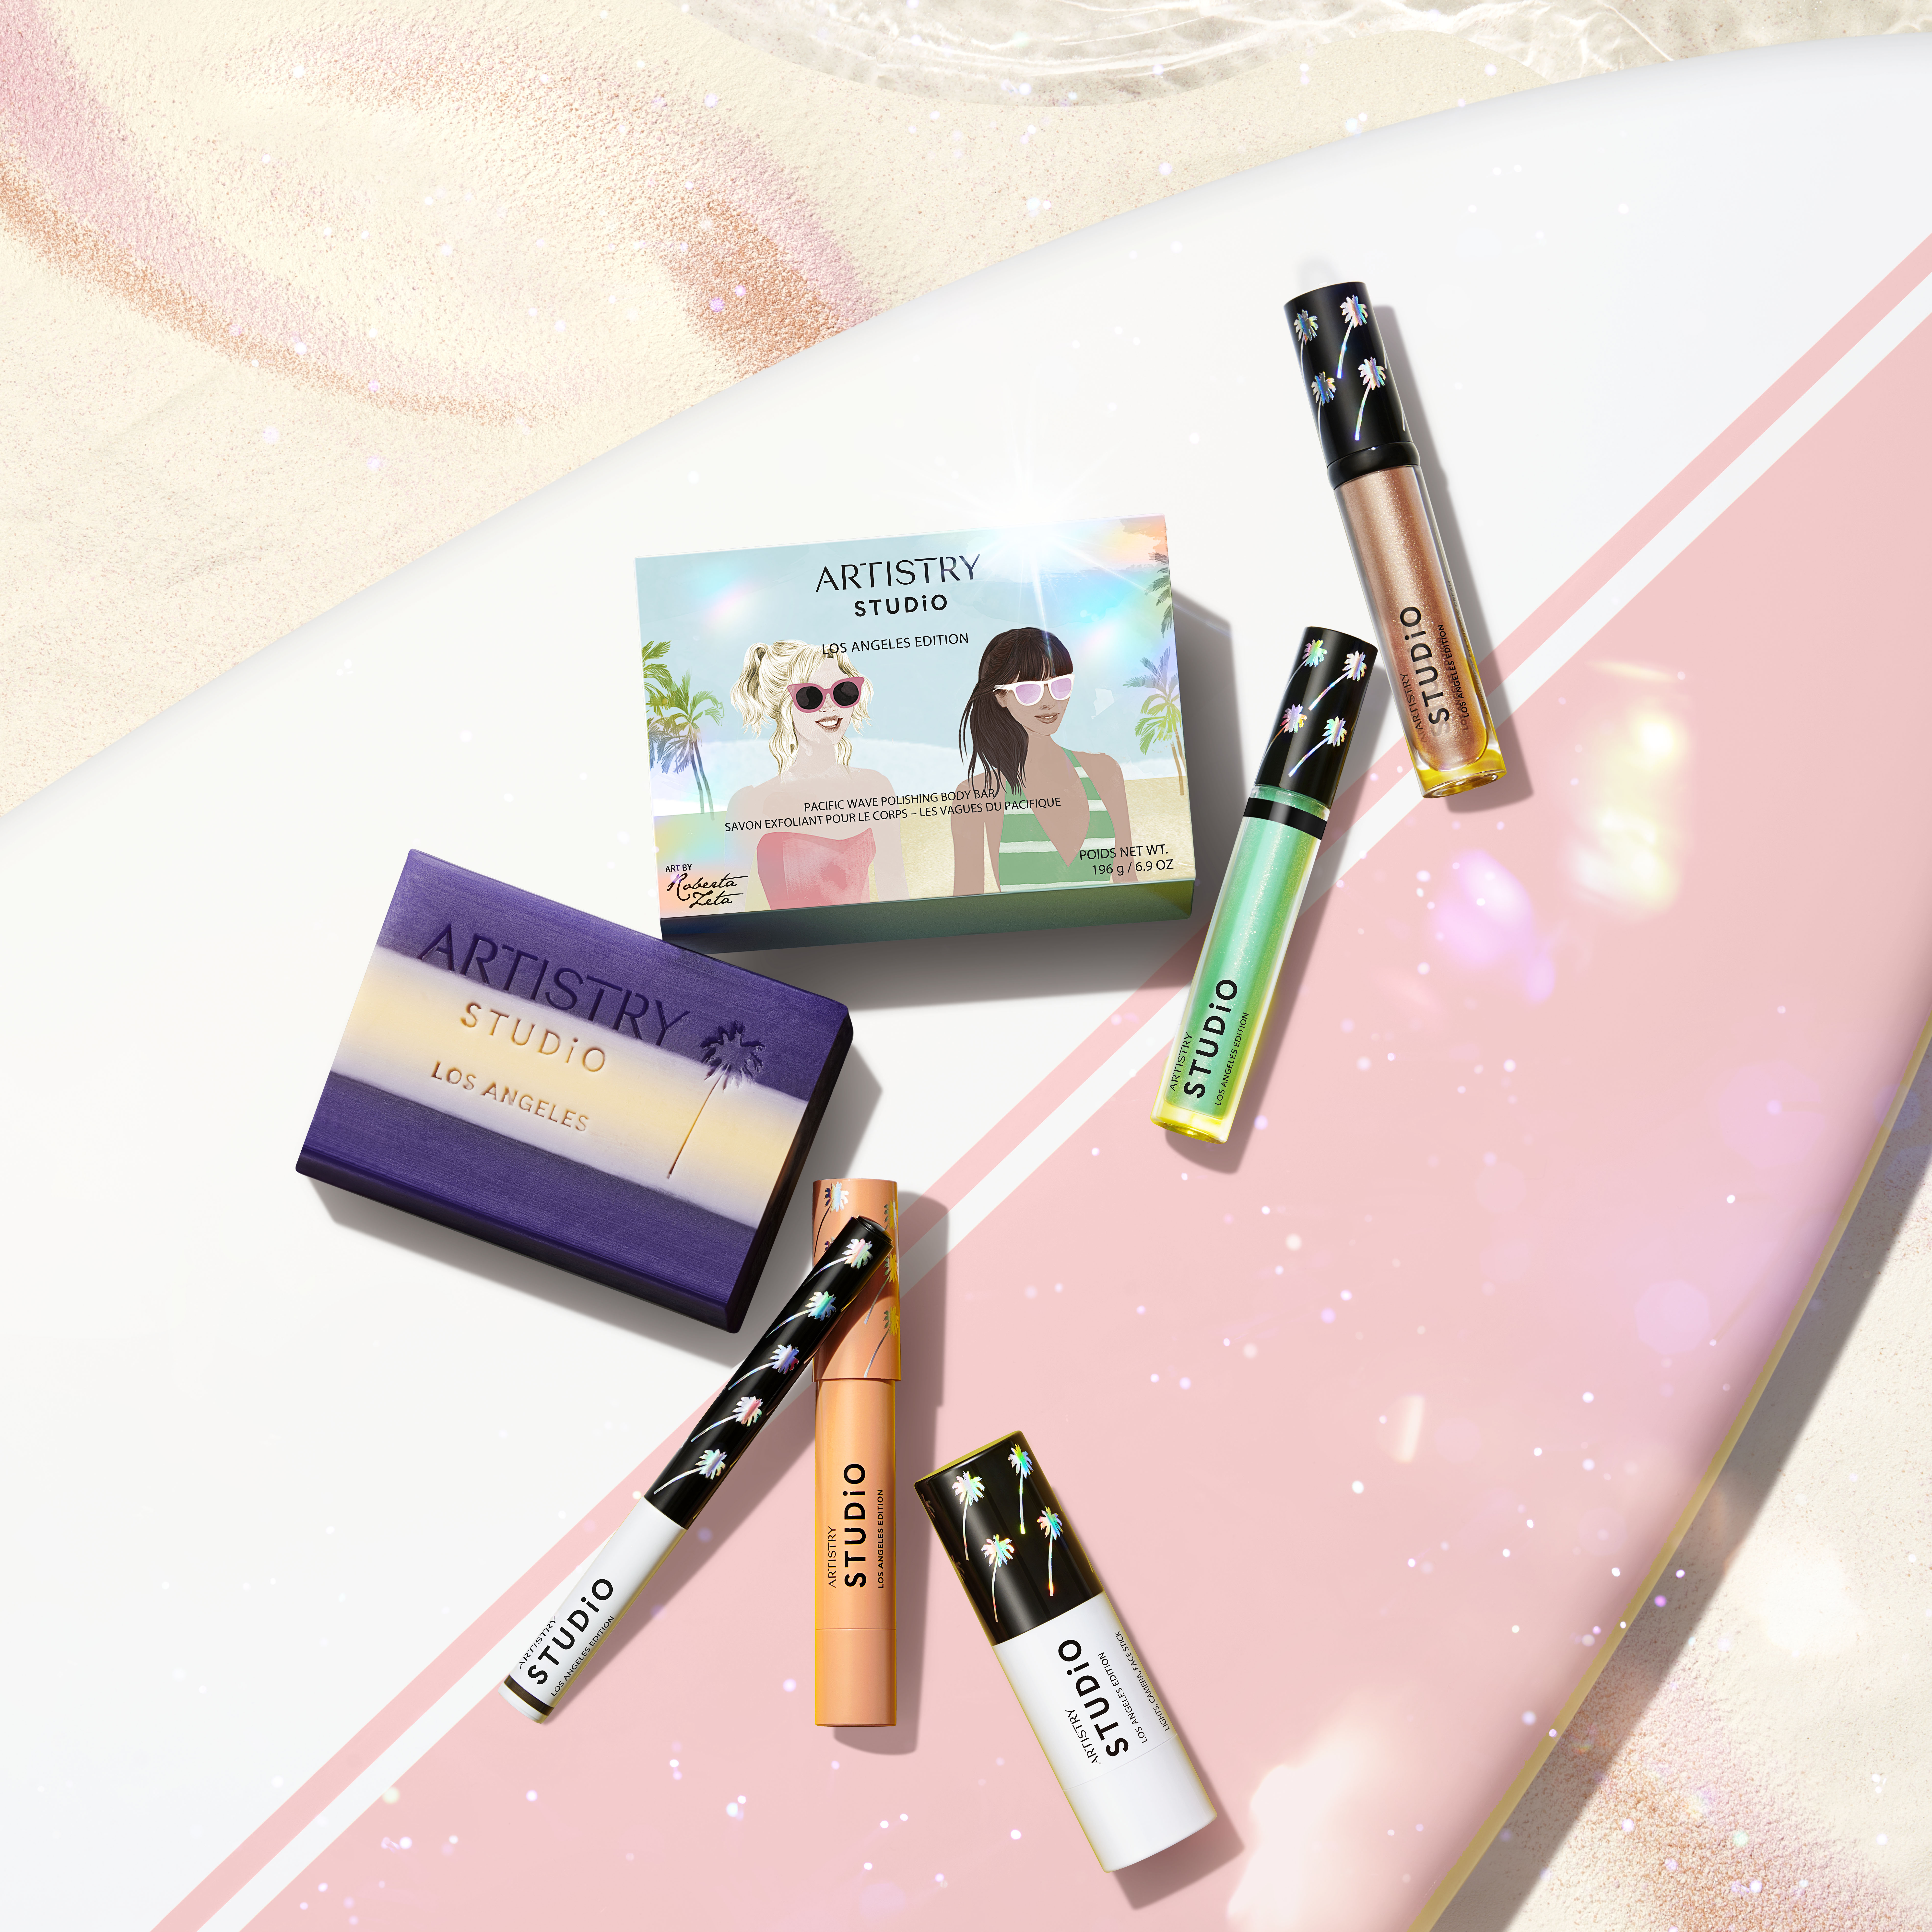 Seven products from the Artistry Studio LA Edition line